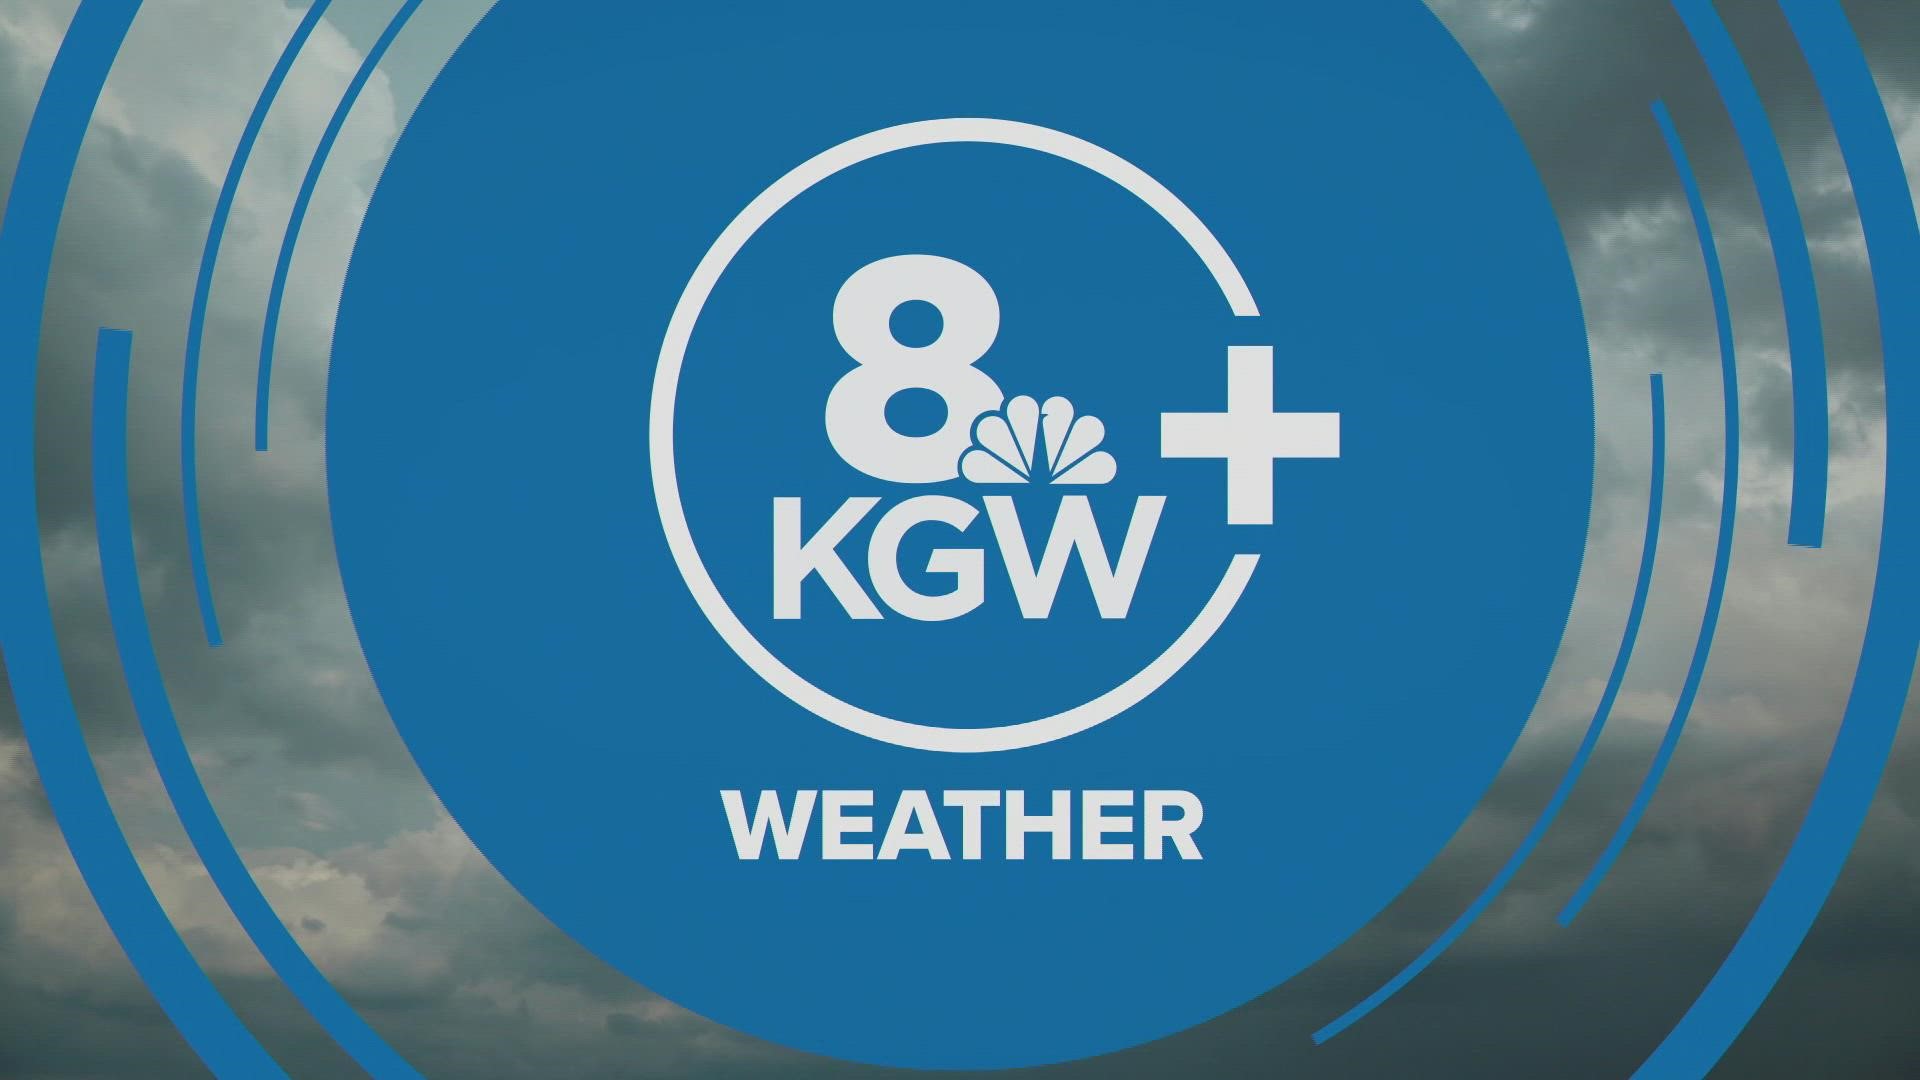 KGW+ weather update for Saturday, June 25, 2022.